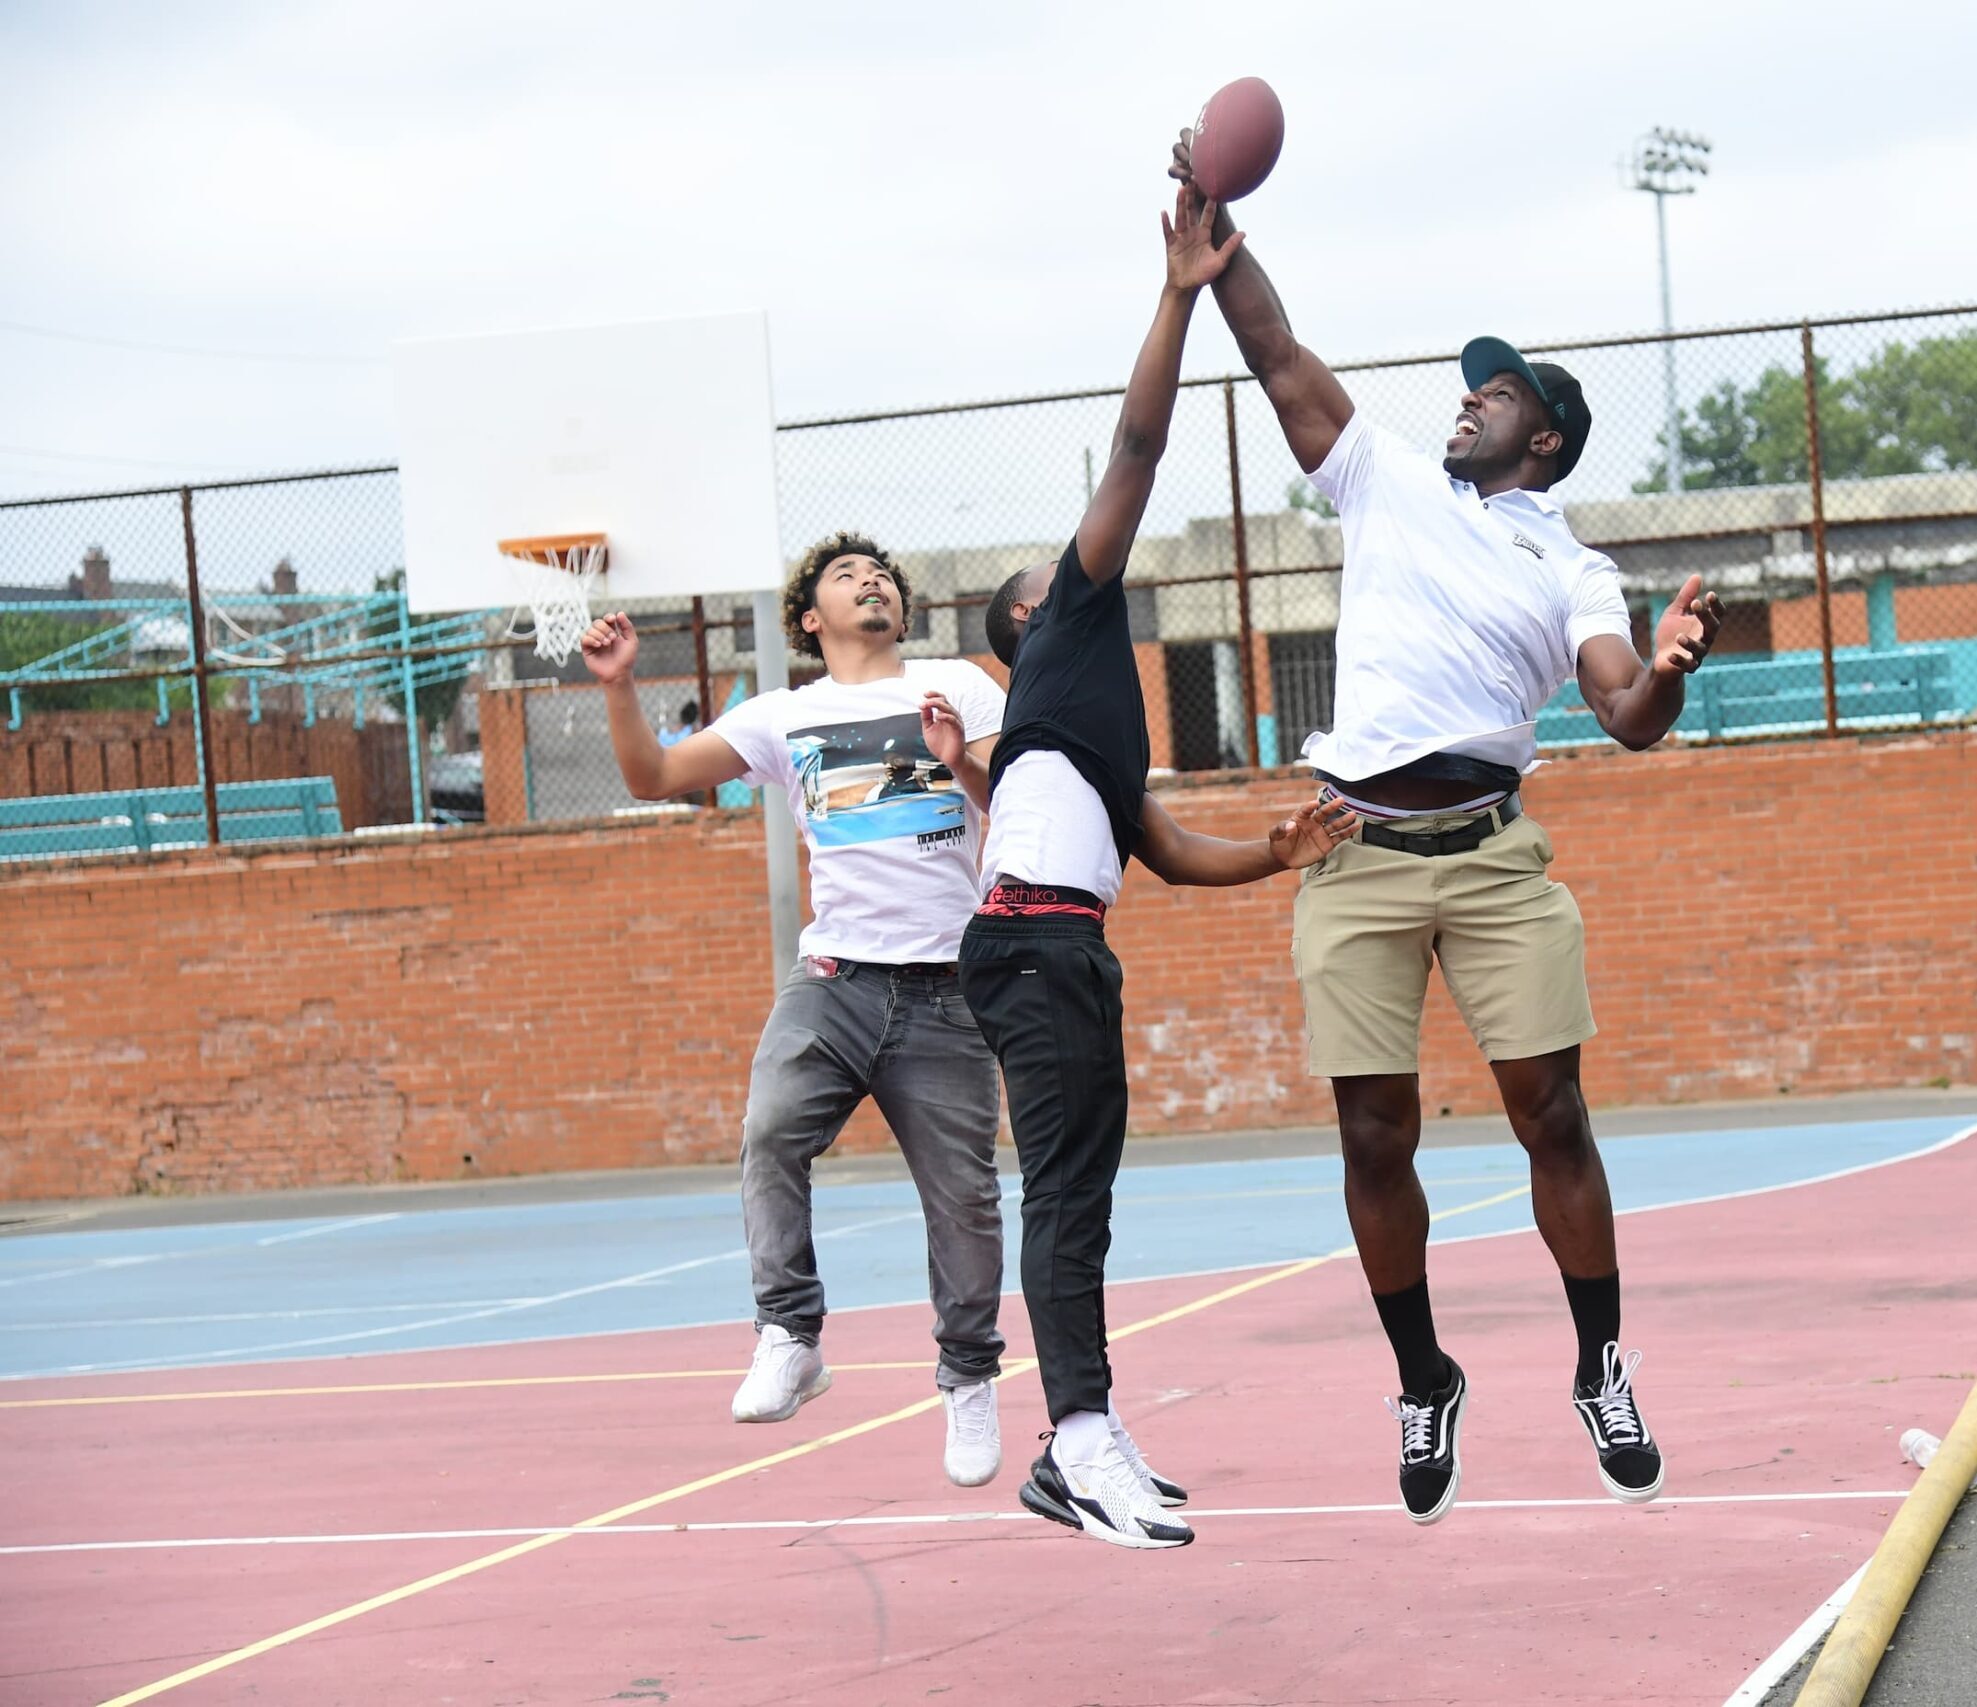 Men playing with a football on a basketball court